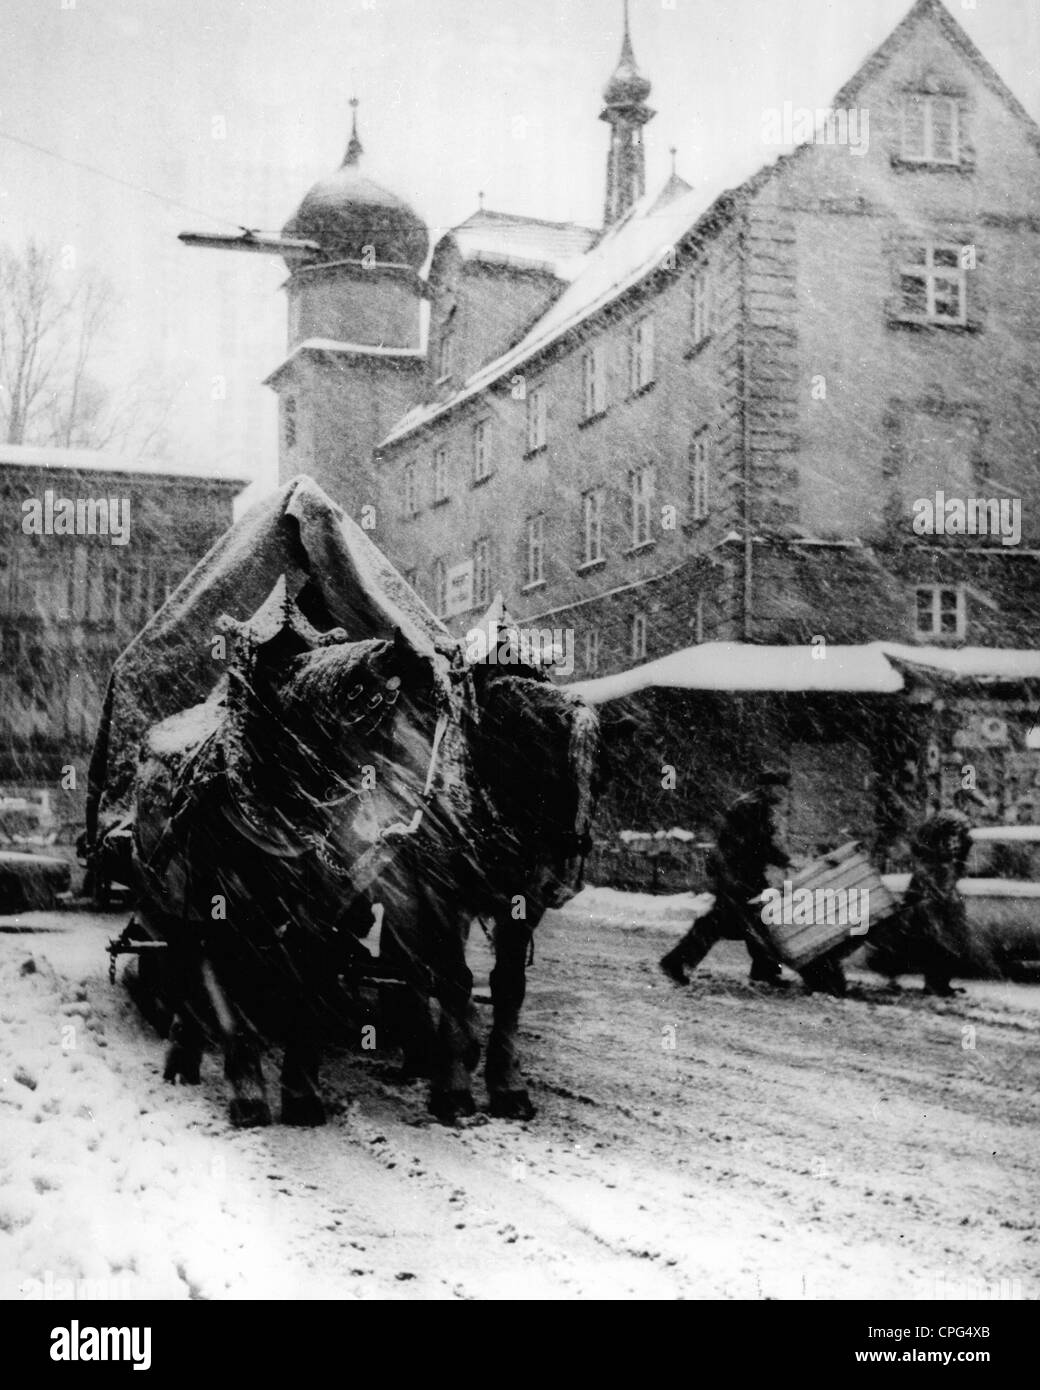 geography / travel, Germany, Munich, gastronomy, brewery horse cart on snowy street, 1950s, 50s, 20th century, historic, historical, snow, winter, wintertime, wintertide, beer, beers, horse, horses, coach, carriage, coaches, carriages, beer reefer, snow, snowing, snow covered, snowcapped, snow-clad, lane, lanes, pack animal, pack animals, street scene, driving snow, people, Additional-Rights-Clearences-Not Available Stock Photo